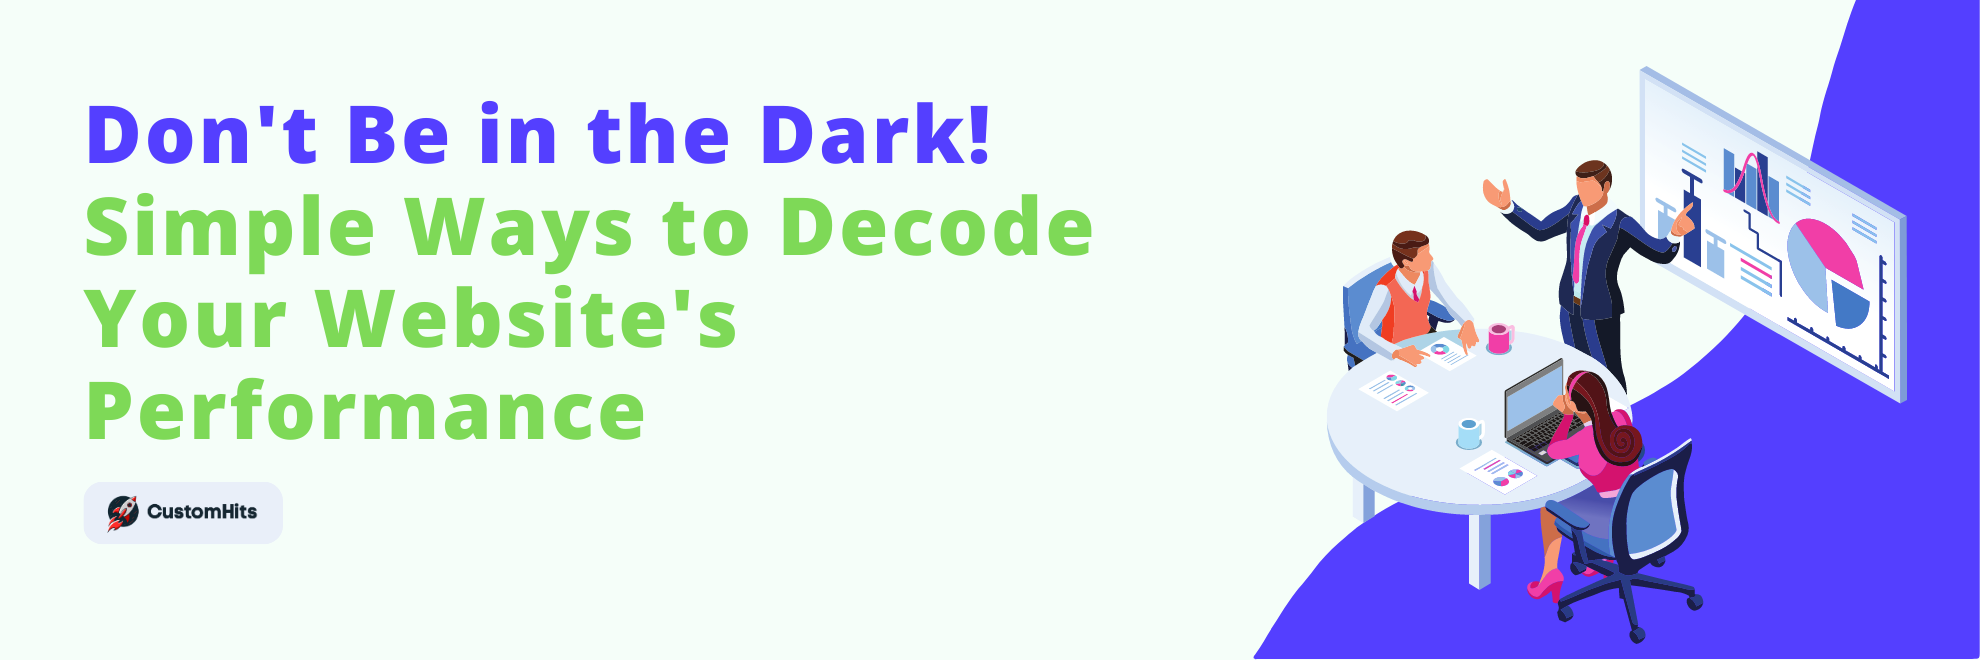 Don't Be in the Dark! Simple Ways to Decode Your Website's Performance